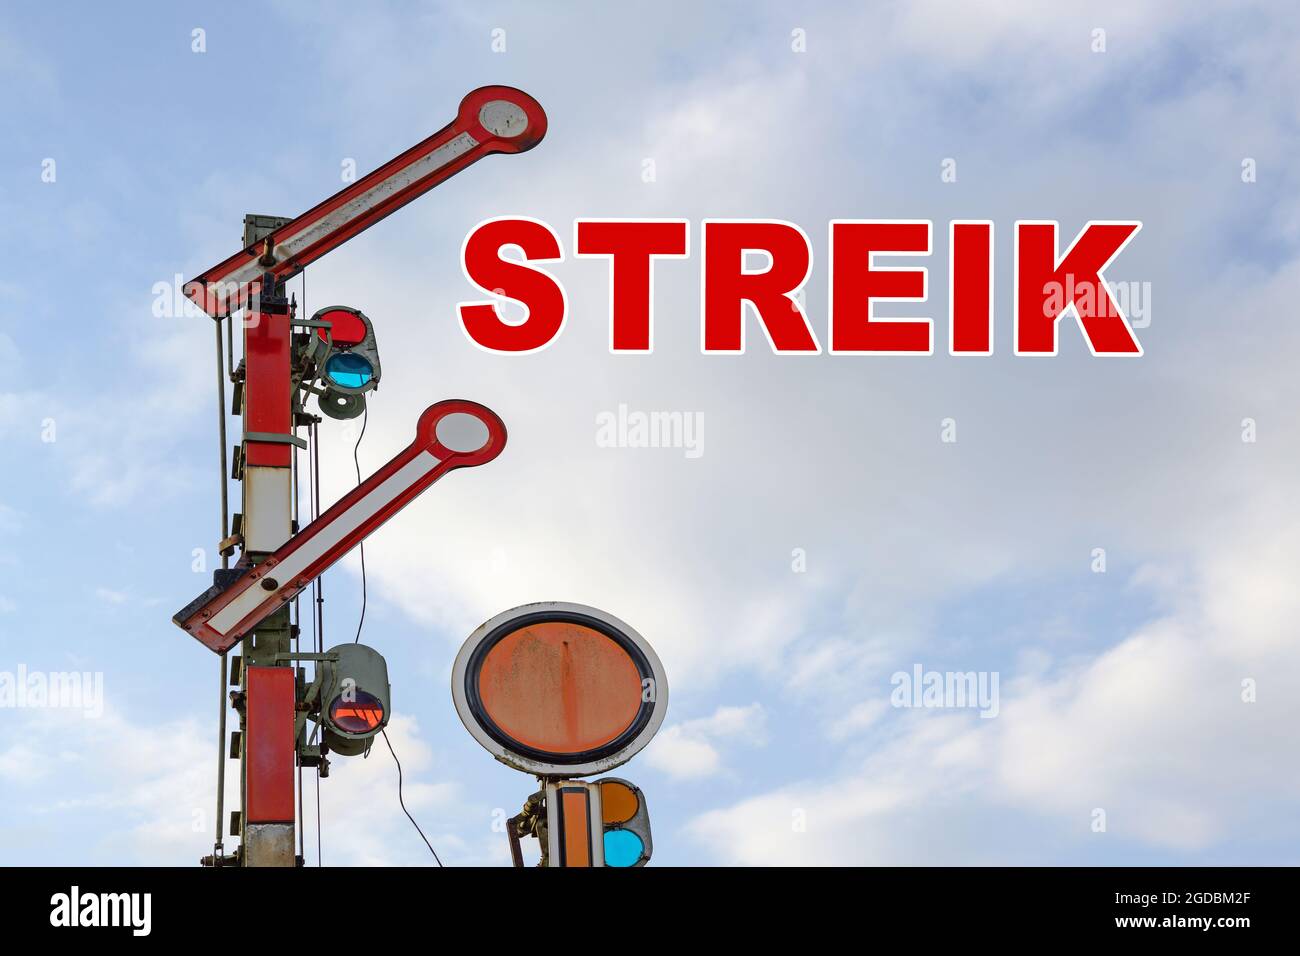 Railroad signal and German text Streik, meaning strike, against a blue sky with clouds, copy space Stock Photo